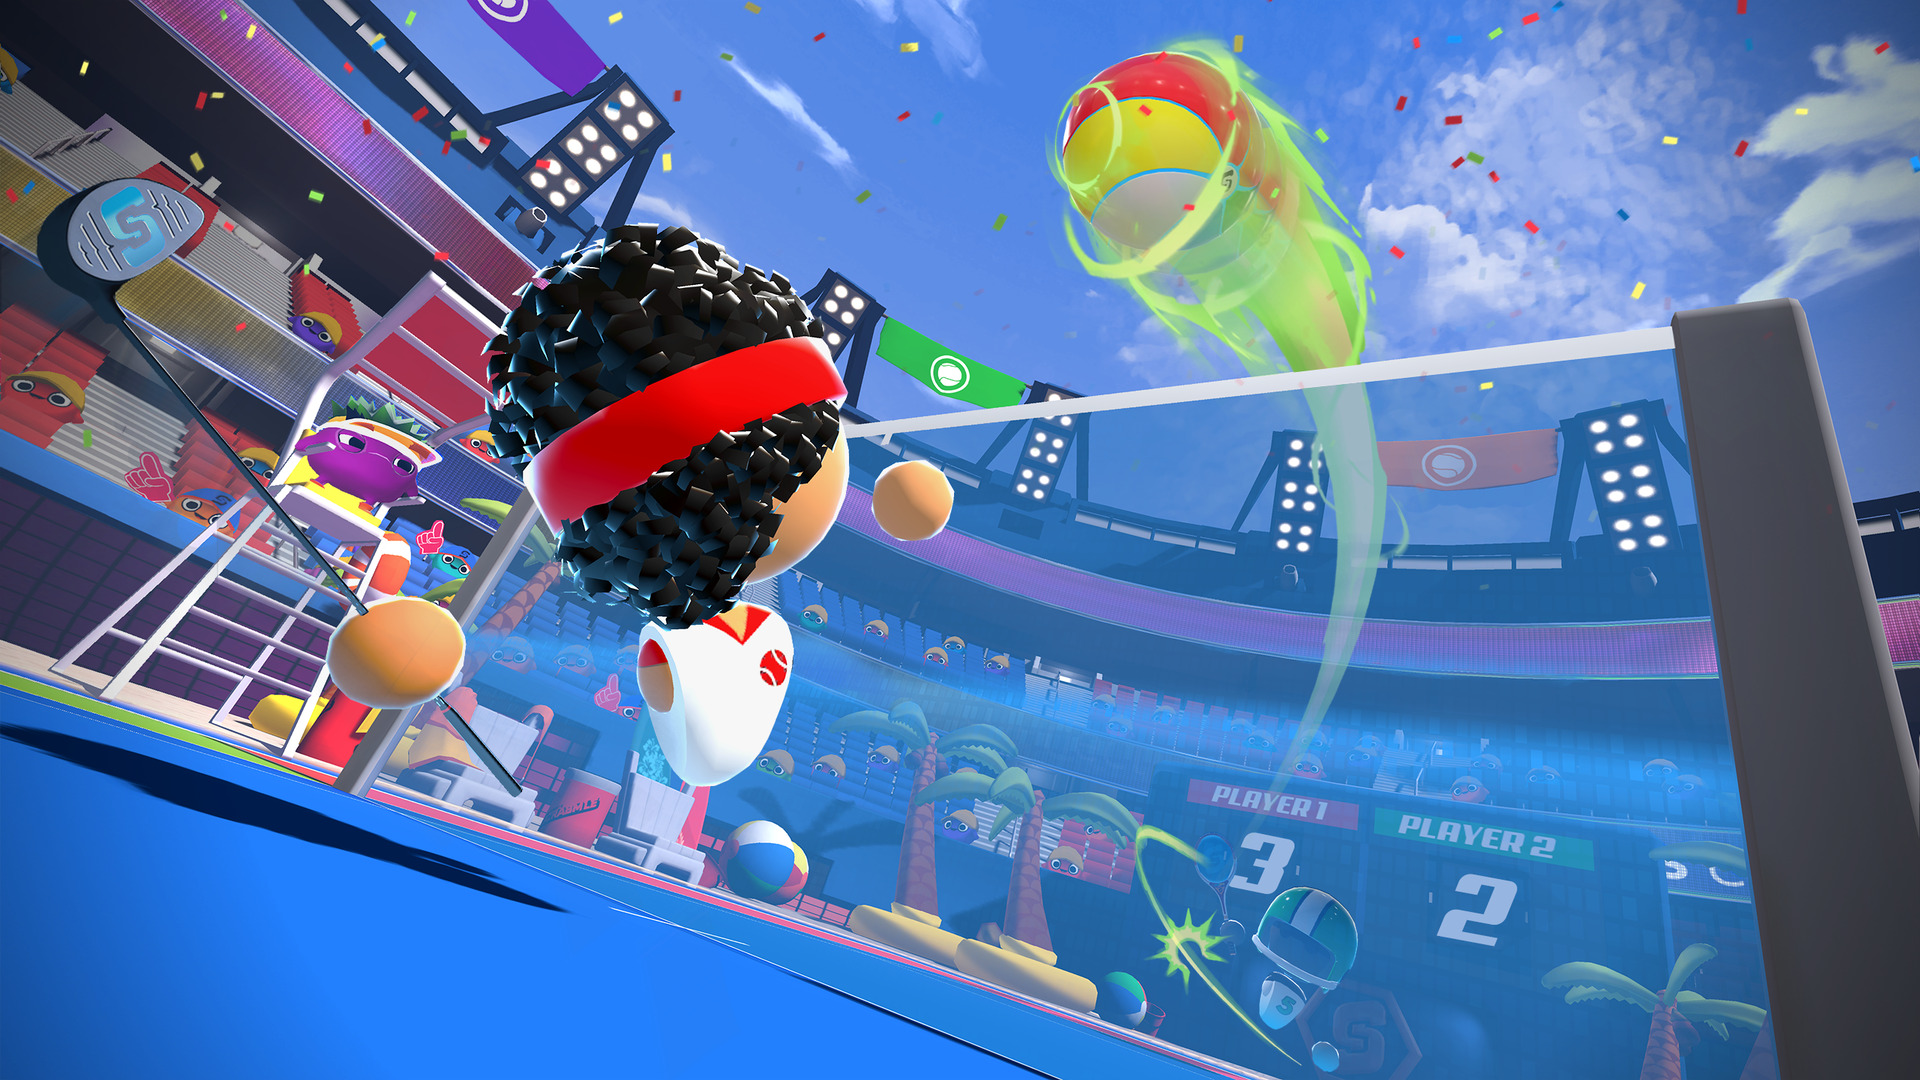 Quest 2 fitness games: an avatar about to hit a tennis ball in Sports Scramble